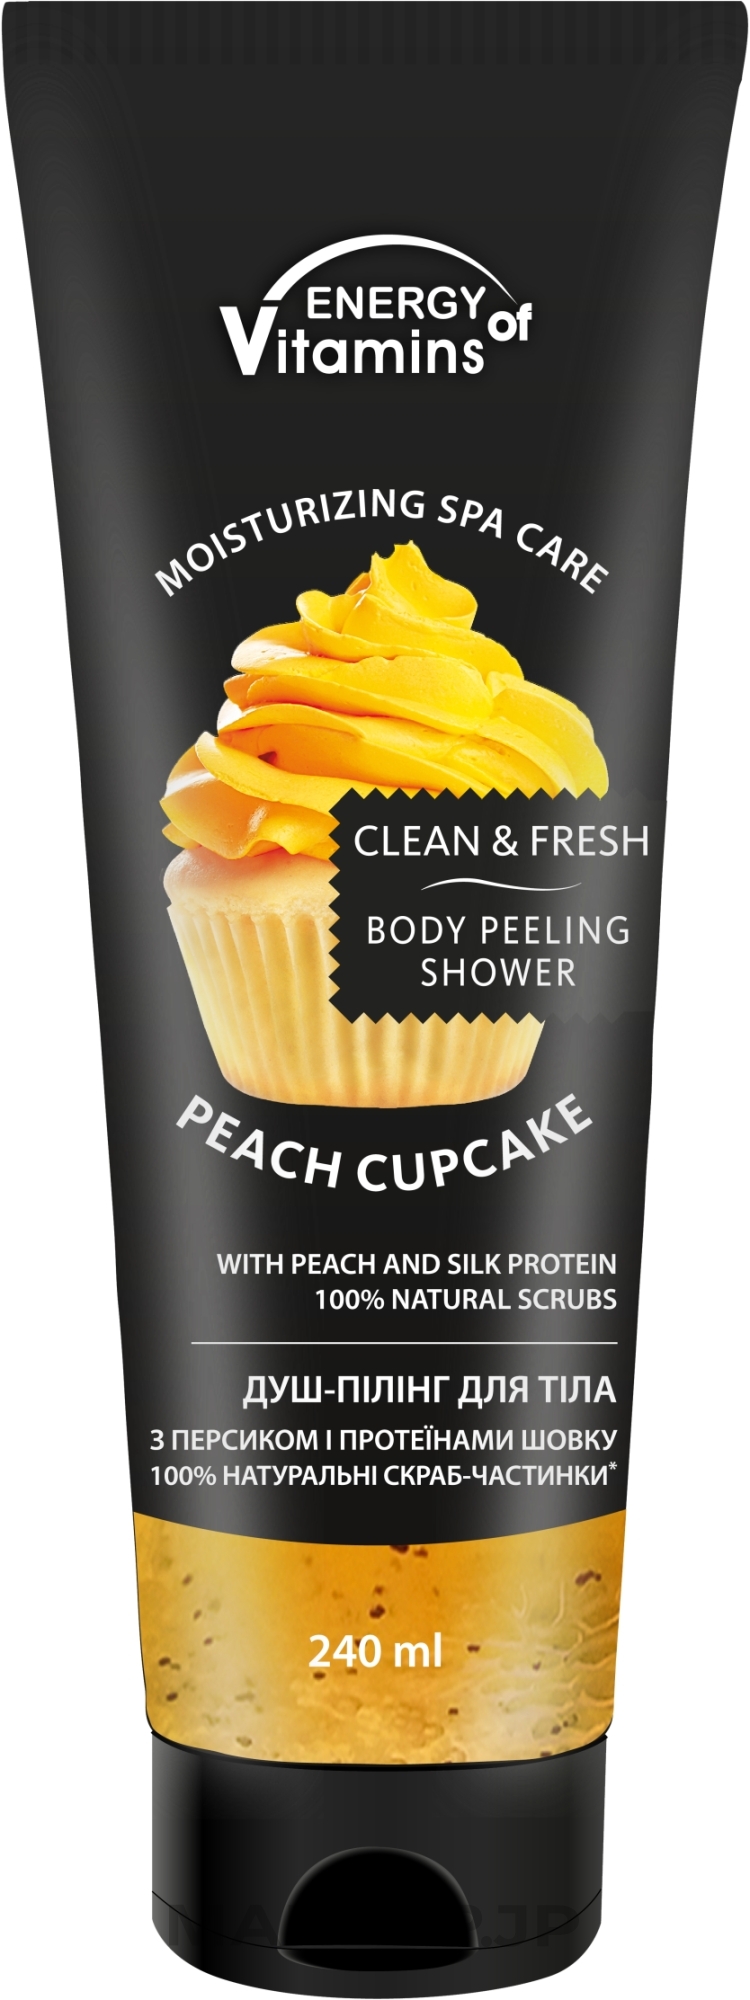 Peeling Shower Gel "Vitamin Cocktail with Apricot Kernel" - Energy of vitamins — photo 240 ml